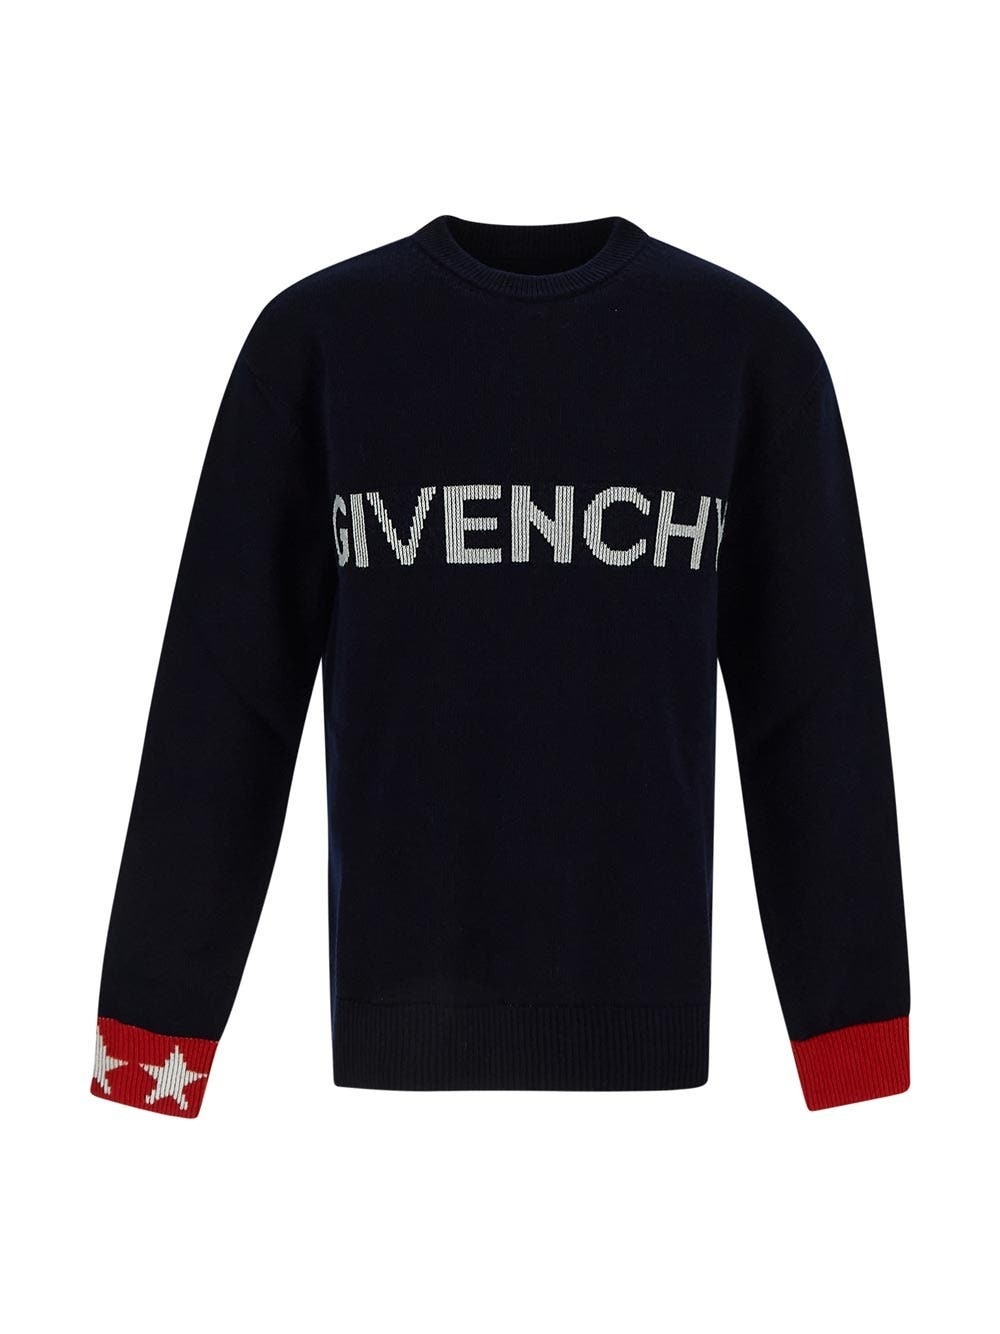 Intarsia logo cotton sweater in black - Givenchy